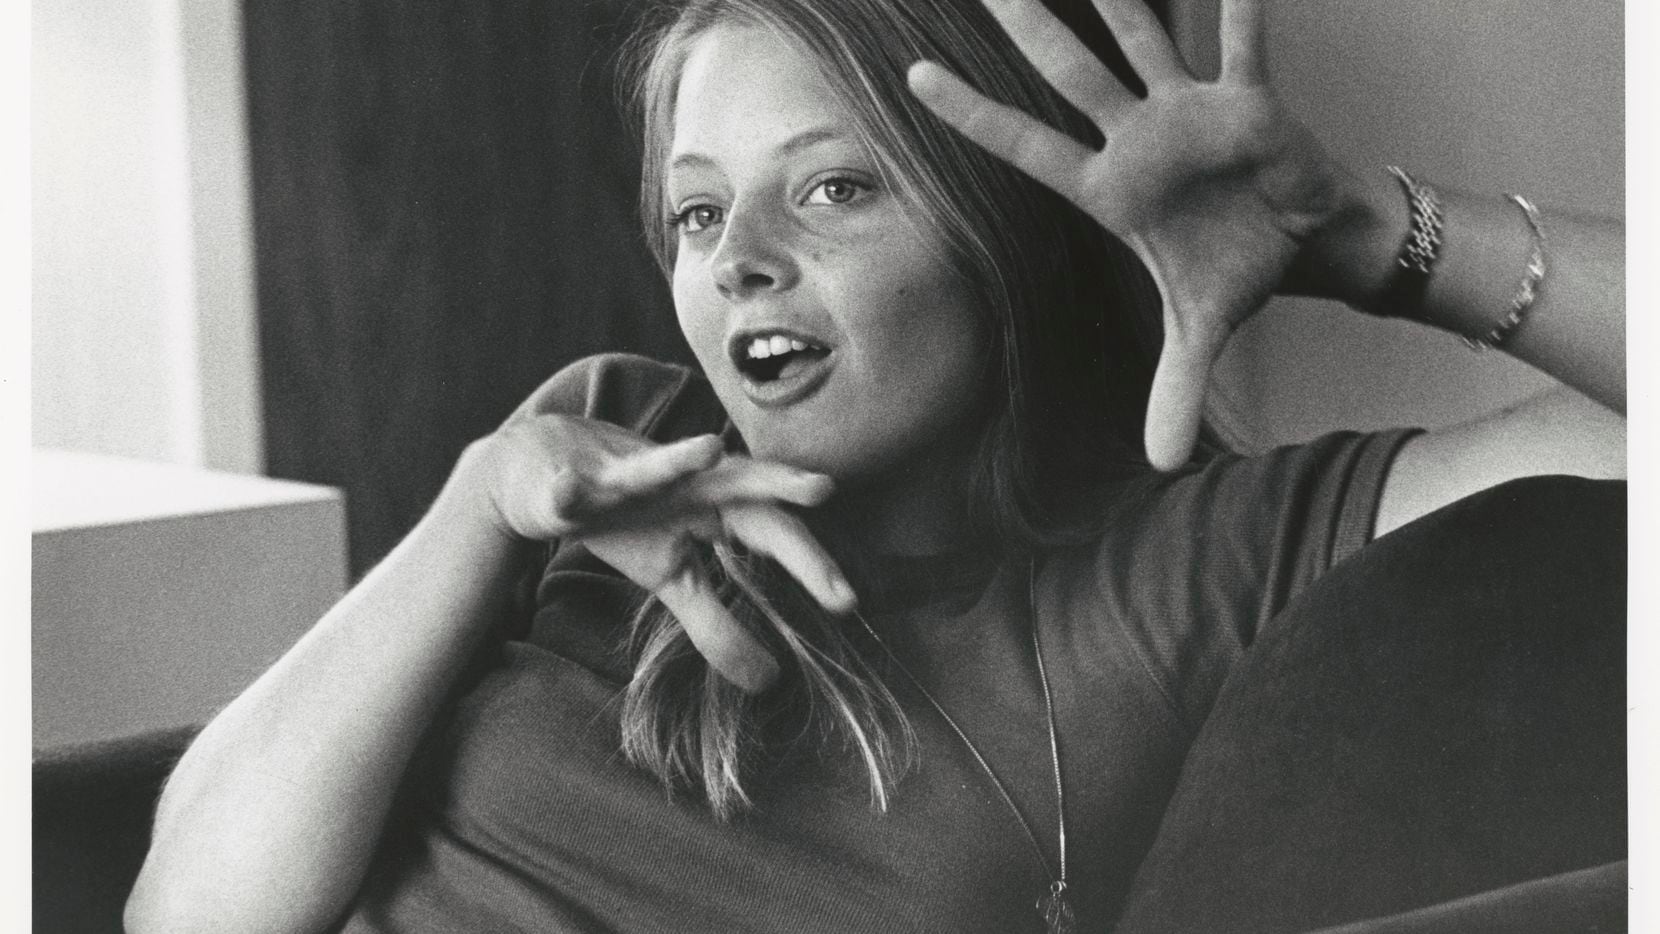 Jodie Foster, actress, director, and producer, in 1980. The photo is included in the exhibit, "Andy Hanson: Picturing Dallas, 1960-2008, on display at the in the Fondren Library at SMU, through Jan. 29, 2020.